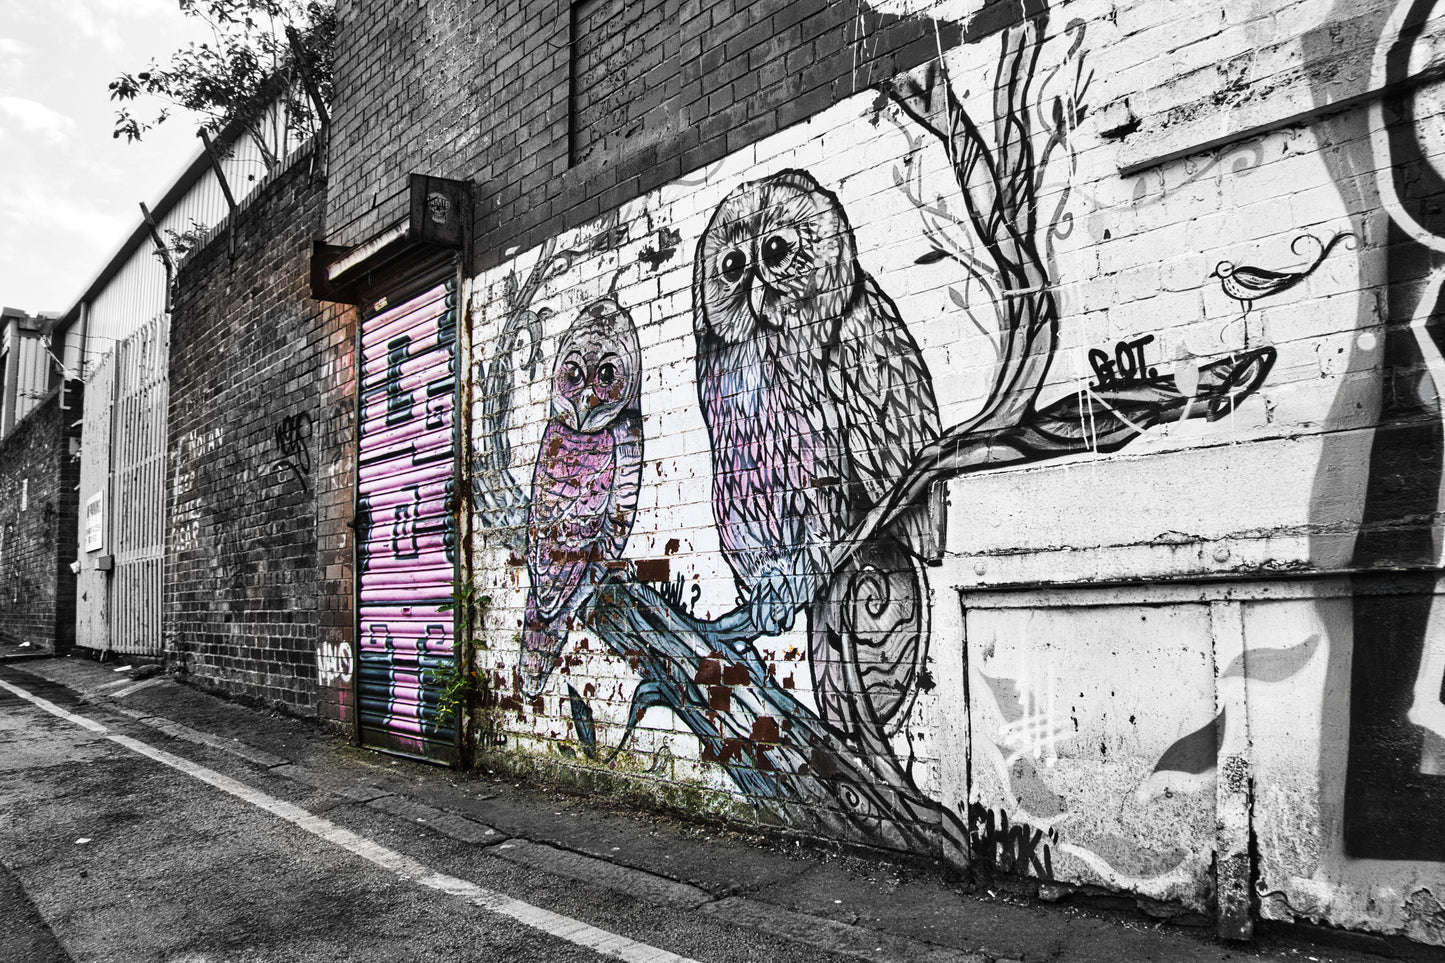 Liverpool Baltic Triangle Photo and Images -Liverpool Graffiti - The Owls - PTI07441 - Photo by Photographer Martin Fisher - Picture The Image